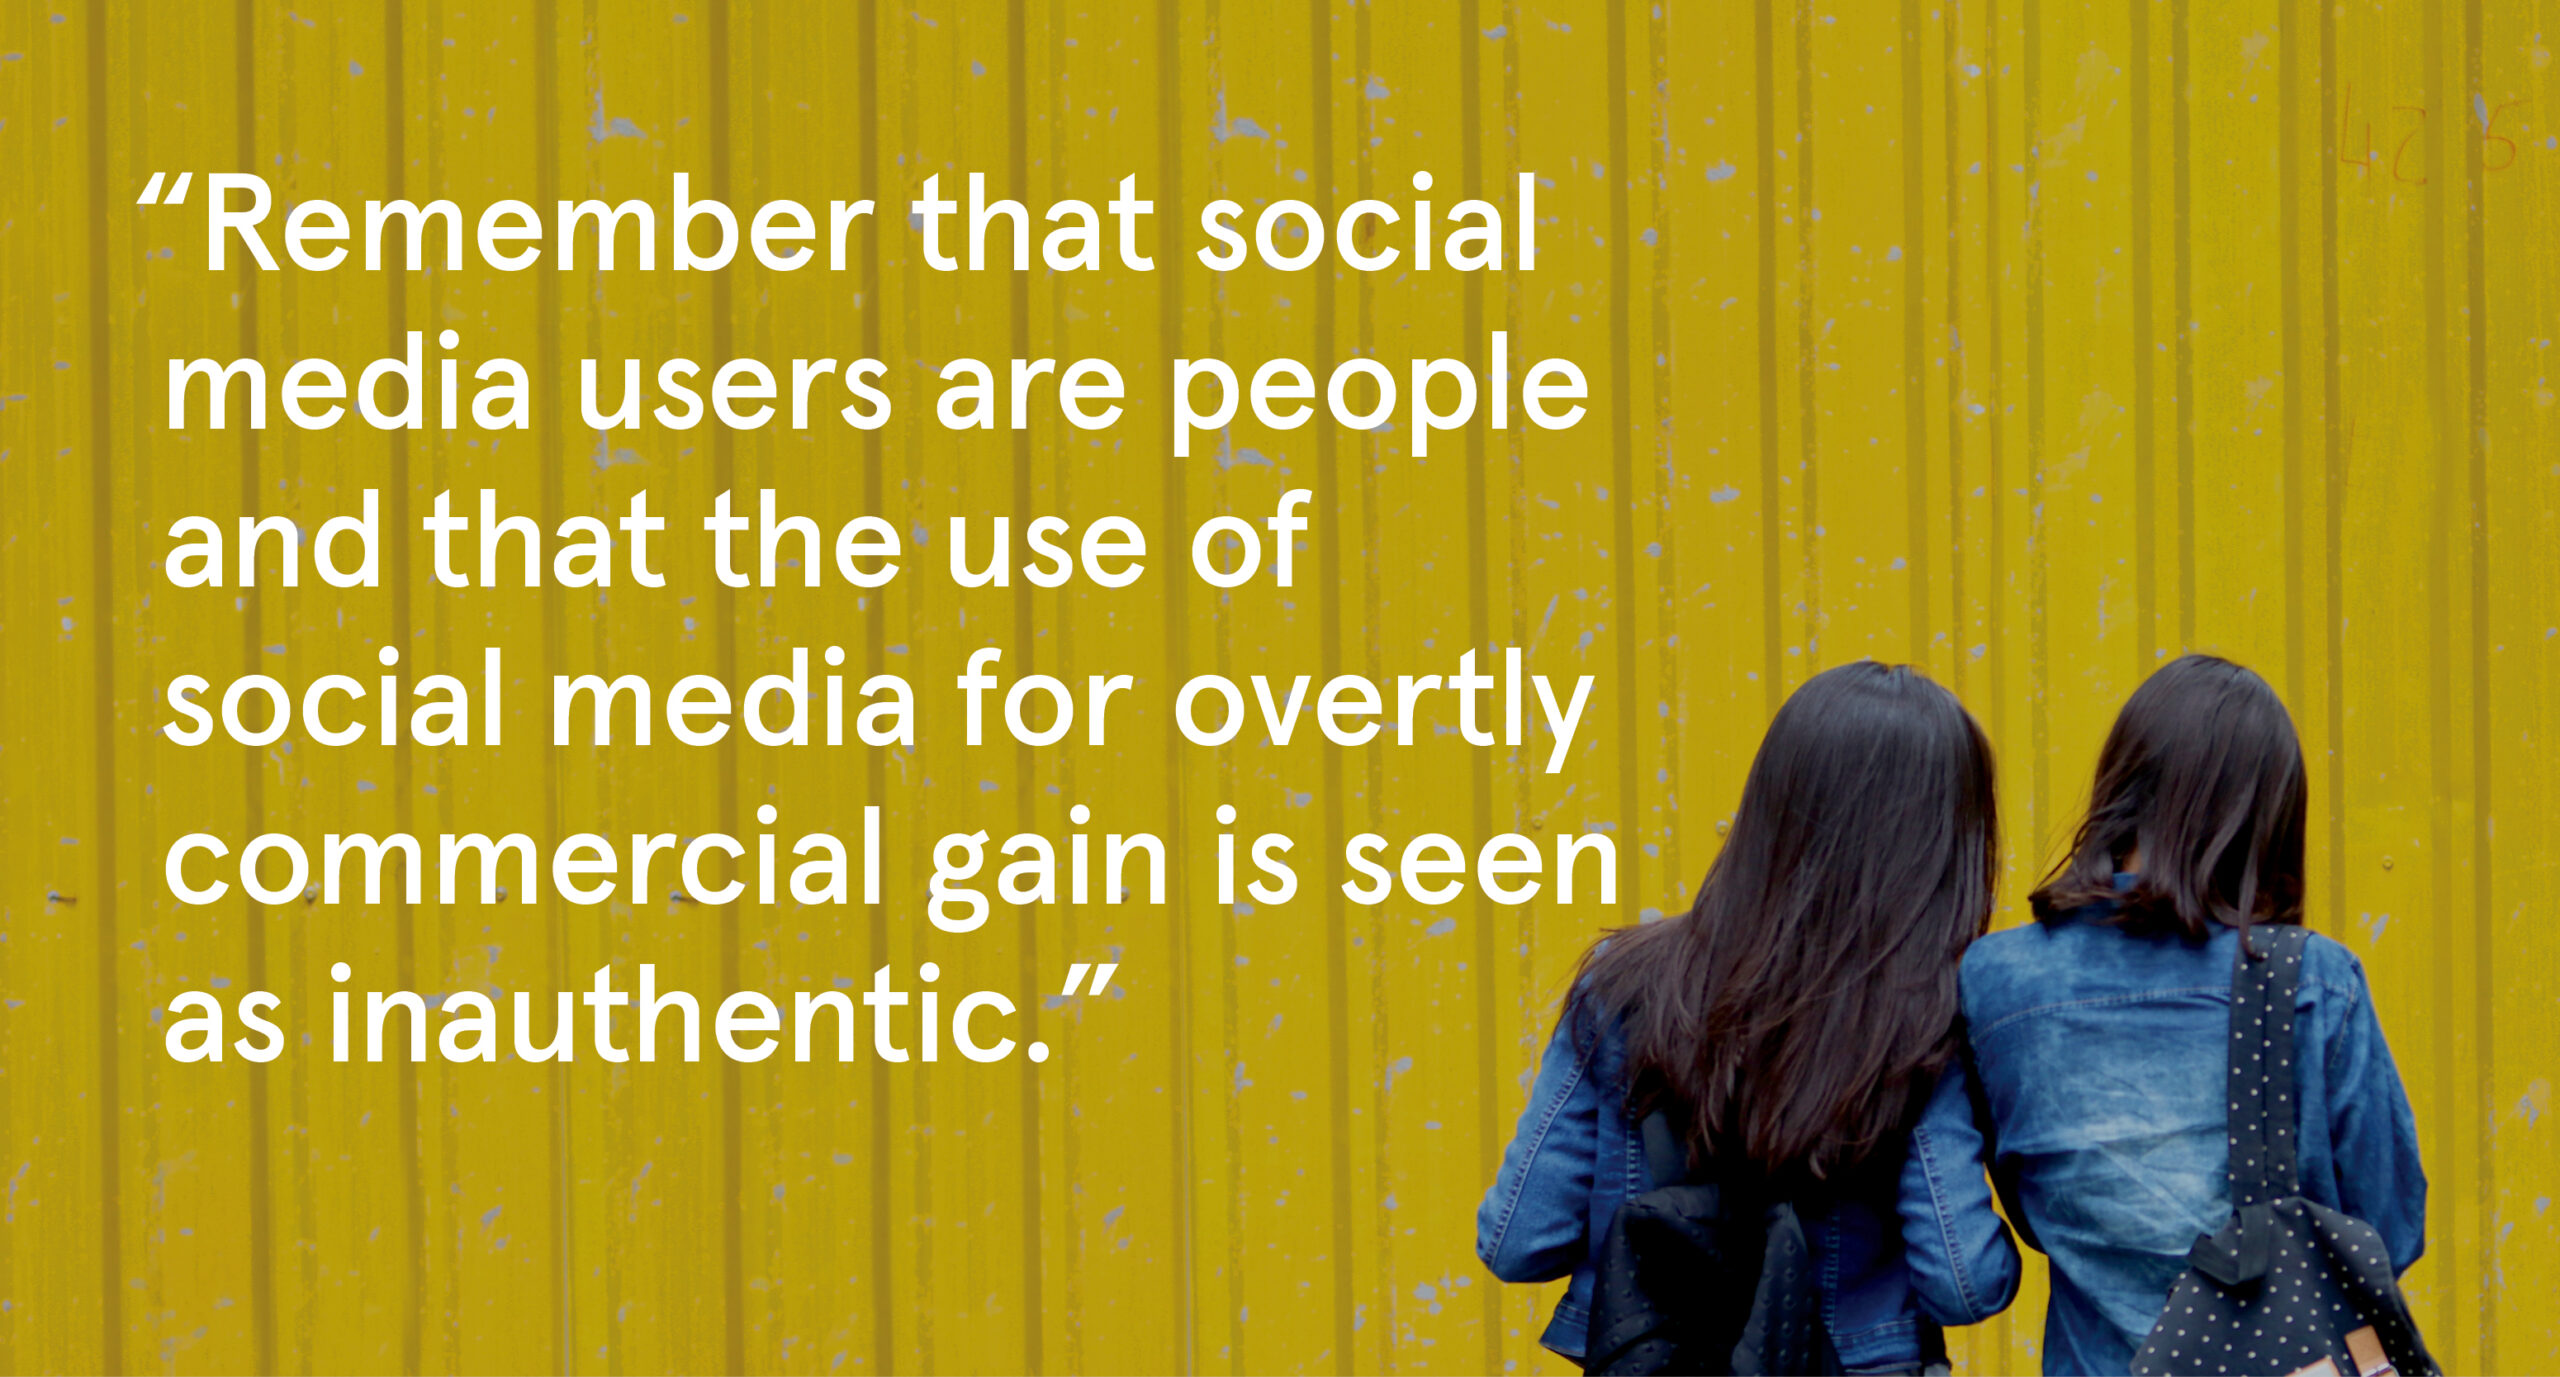 2 girls face away from the camera looking at a phone, the caption states "Remember that social media users are people and that the use of social media for overtly commercial gain is seen as inauthentic".